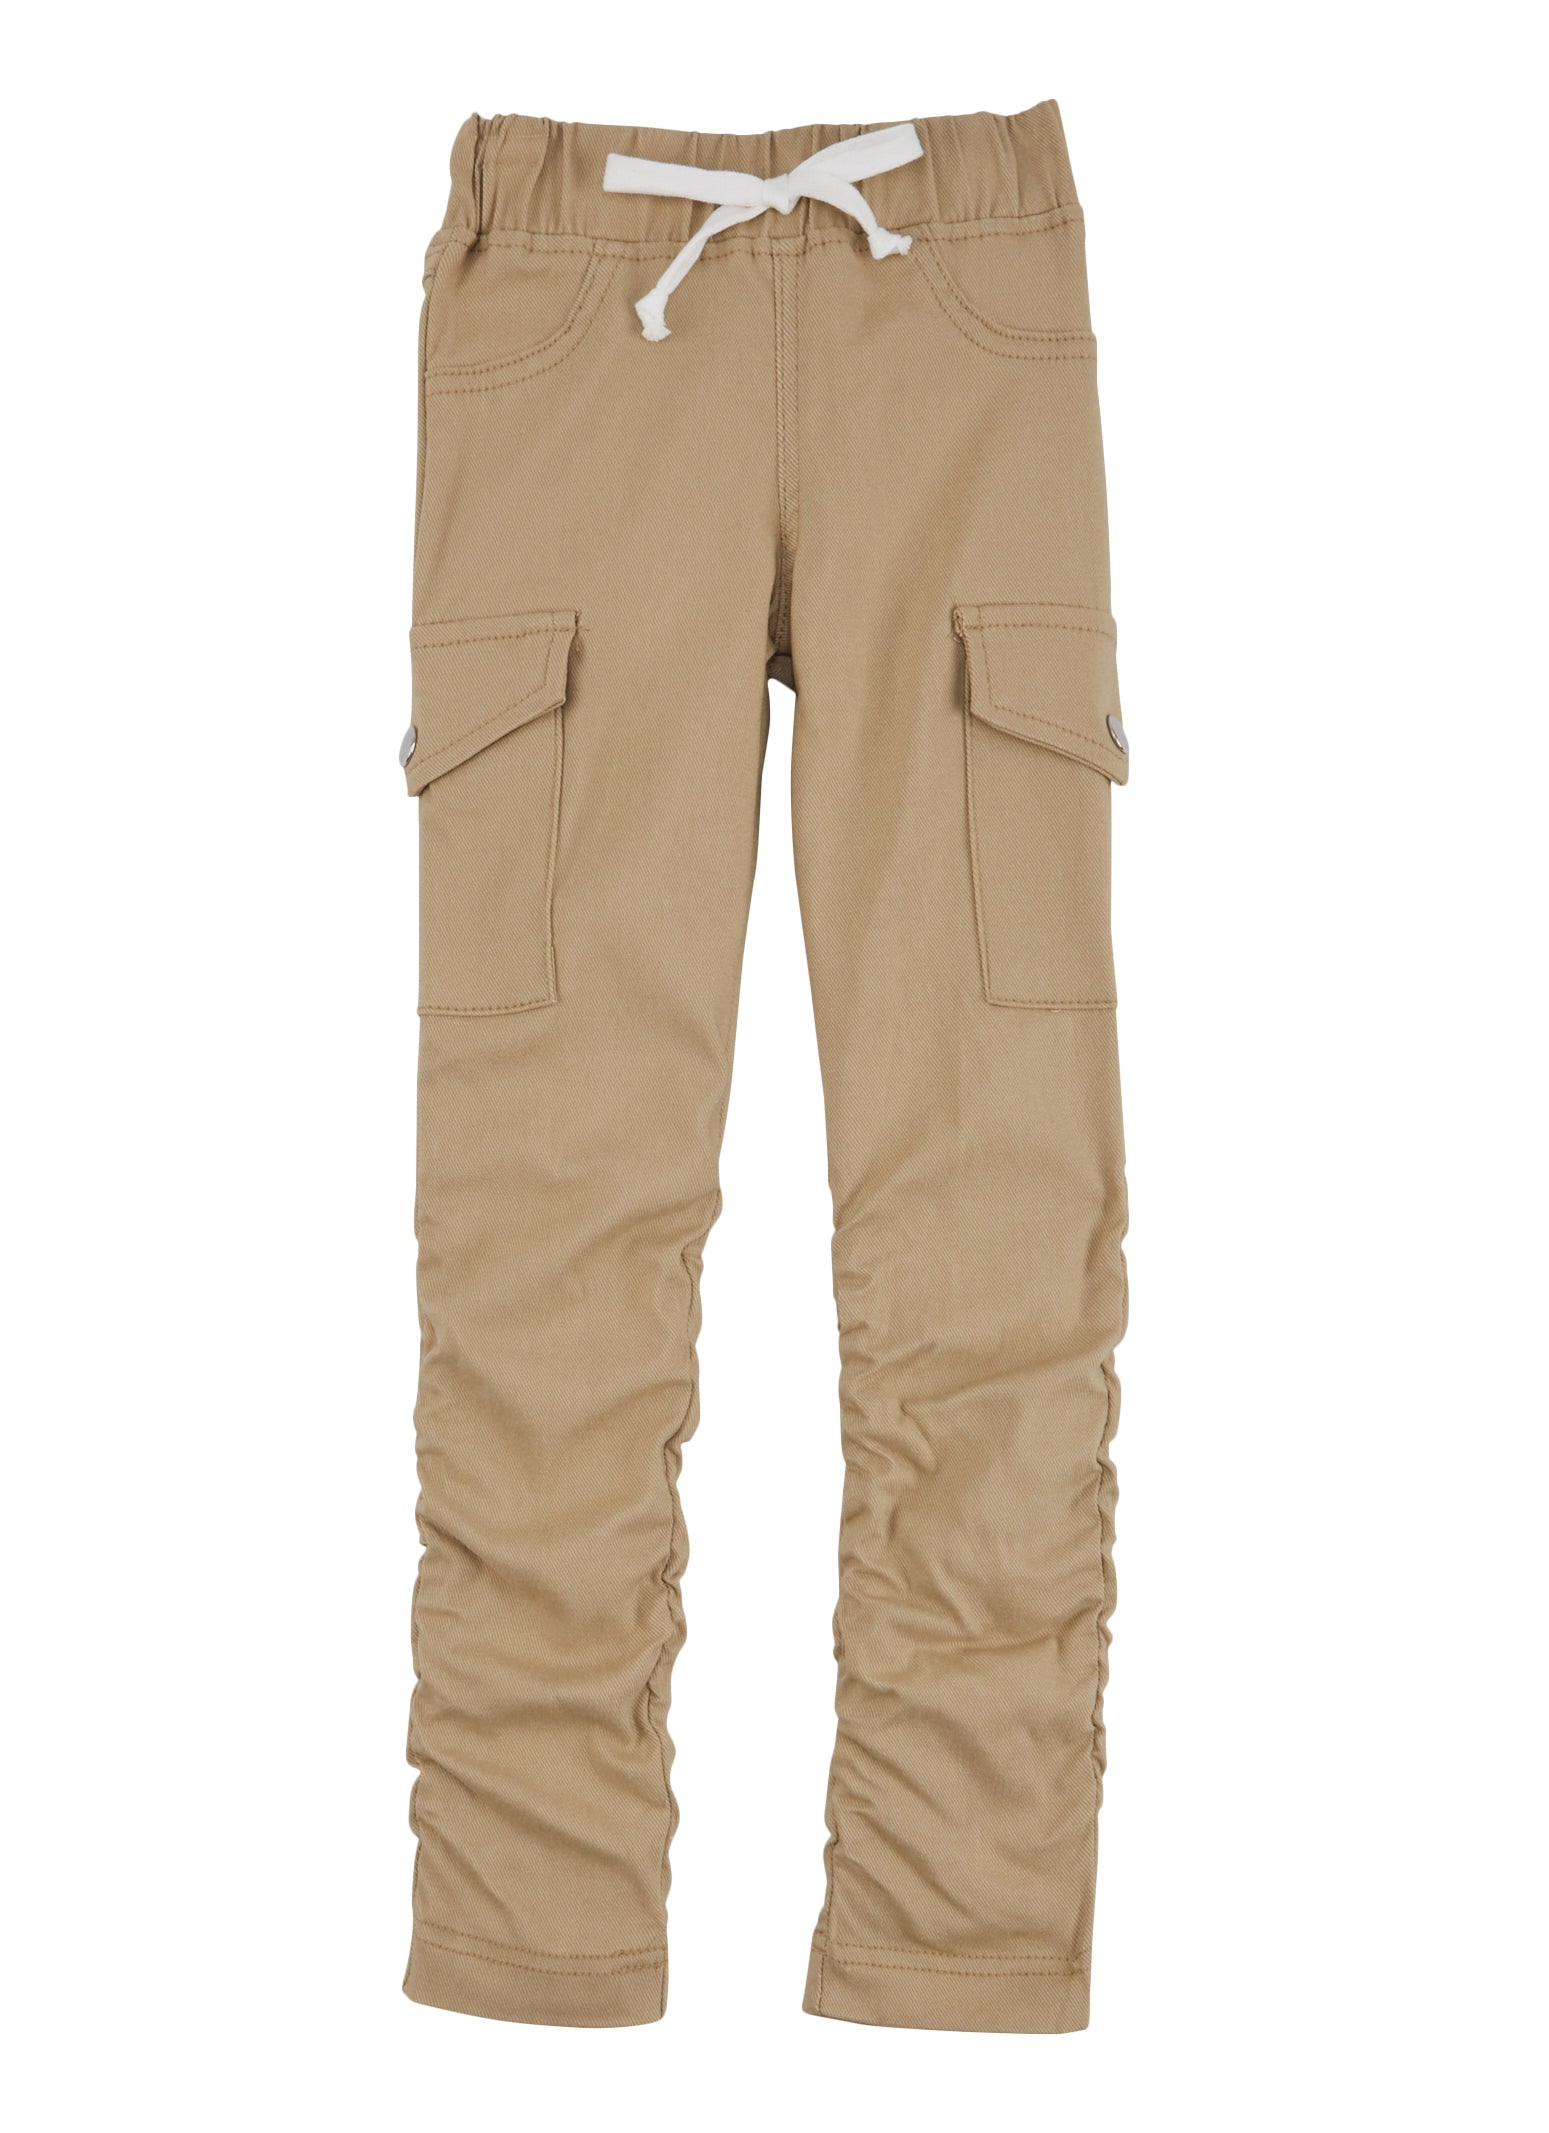 Little Girls Hyperstretch Cargo Pocket Stacked Pants,